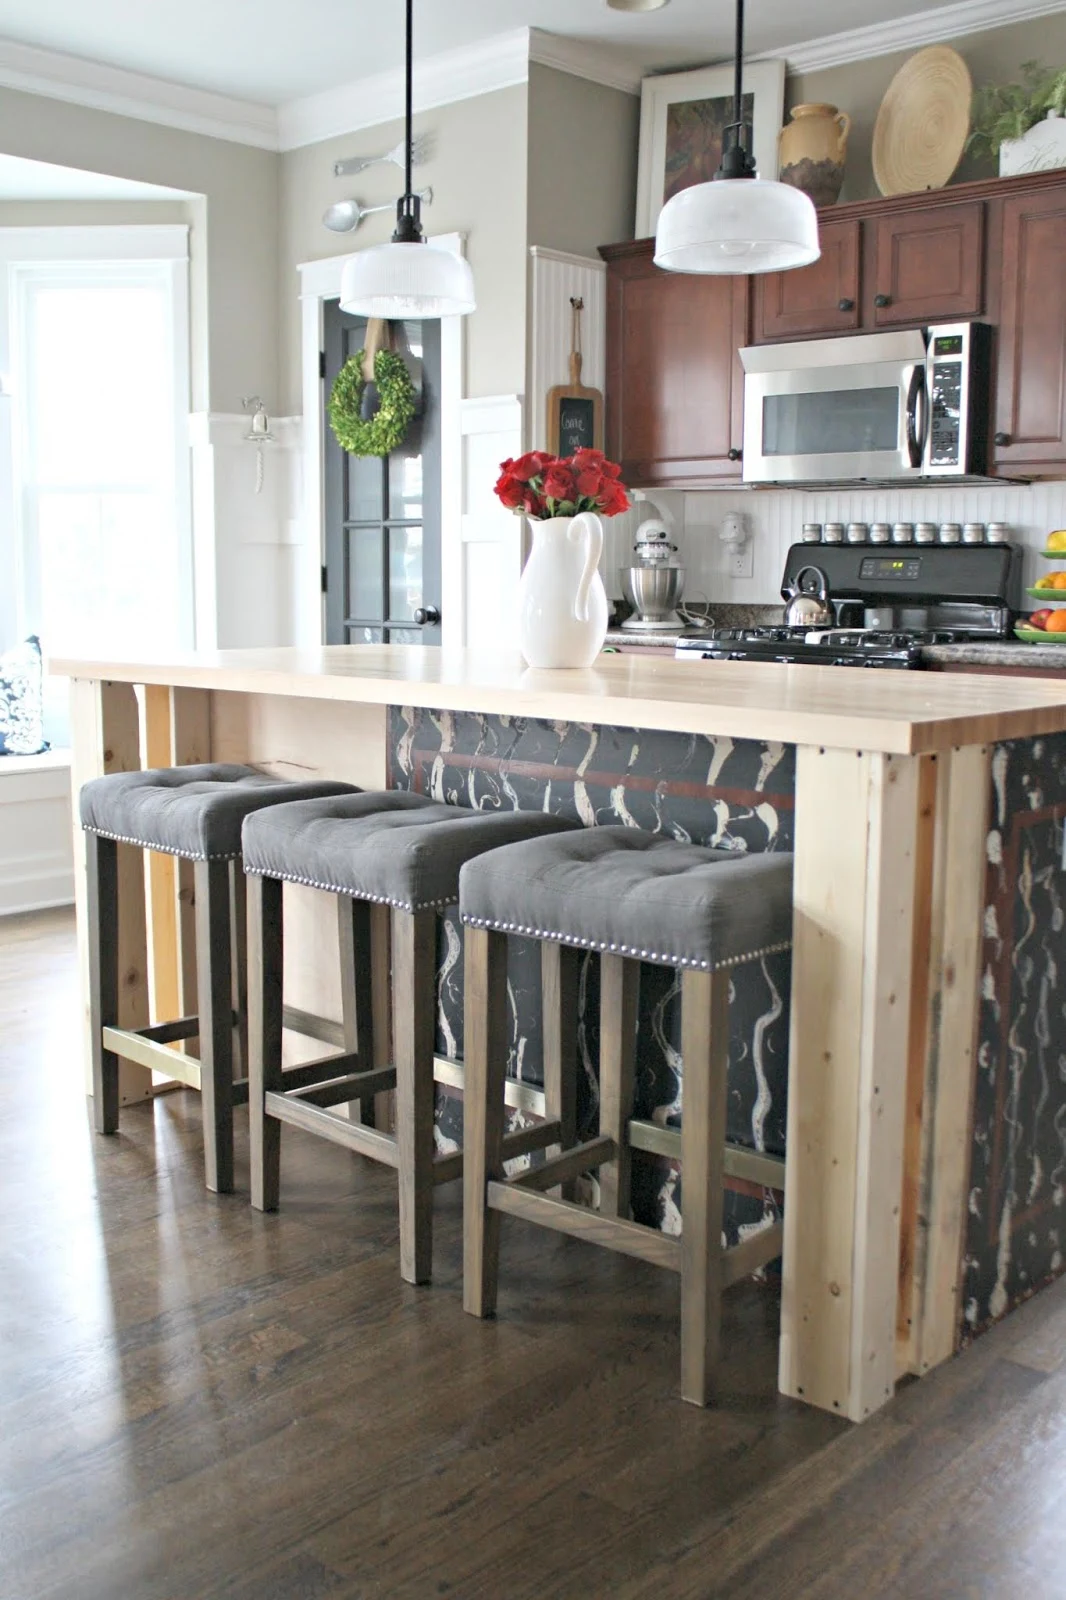 How to build out sides of kitchen island